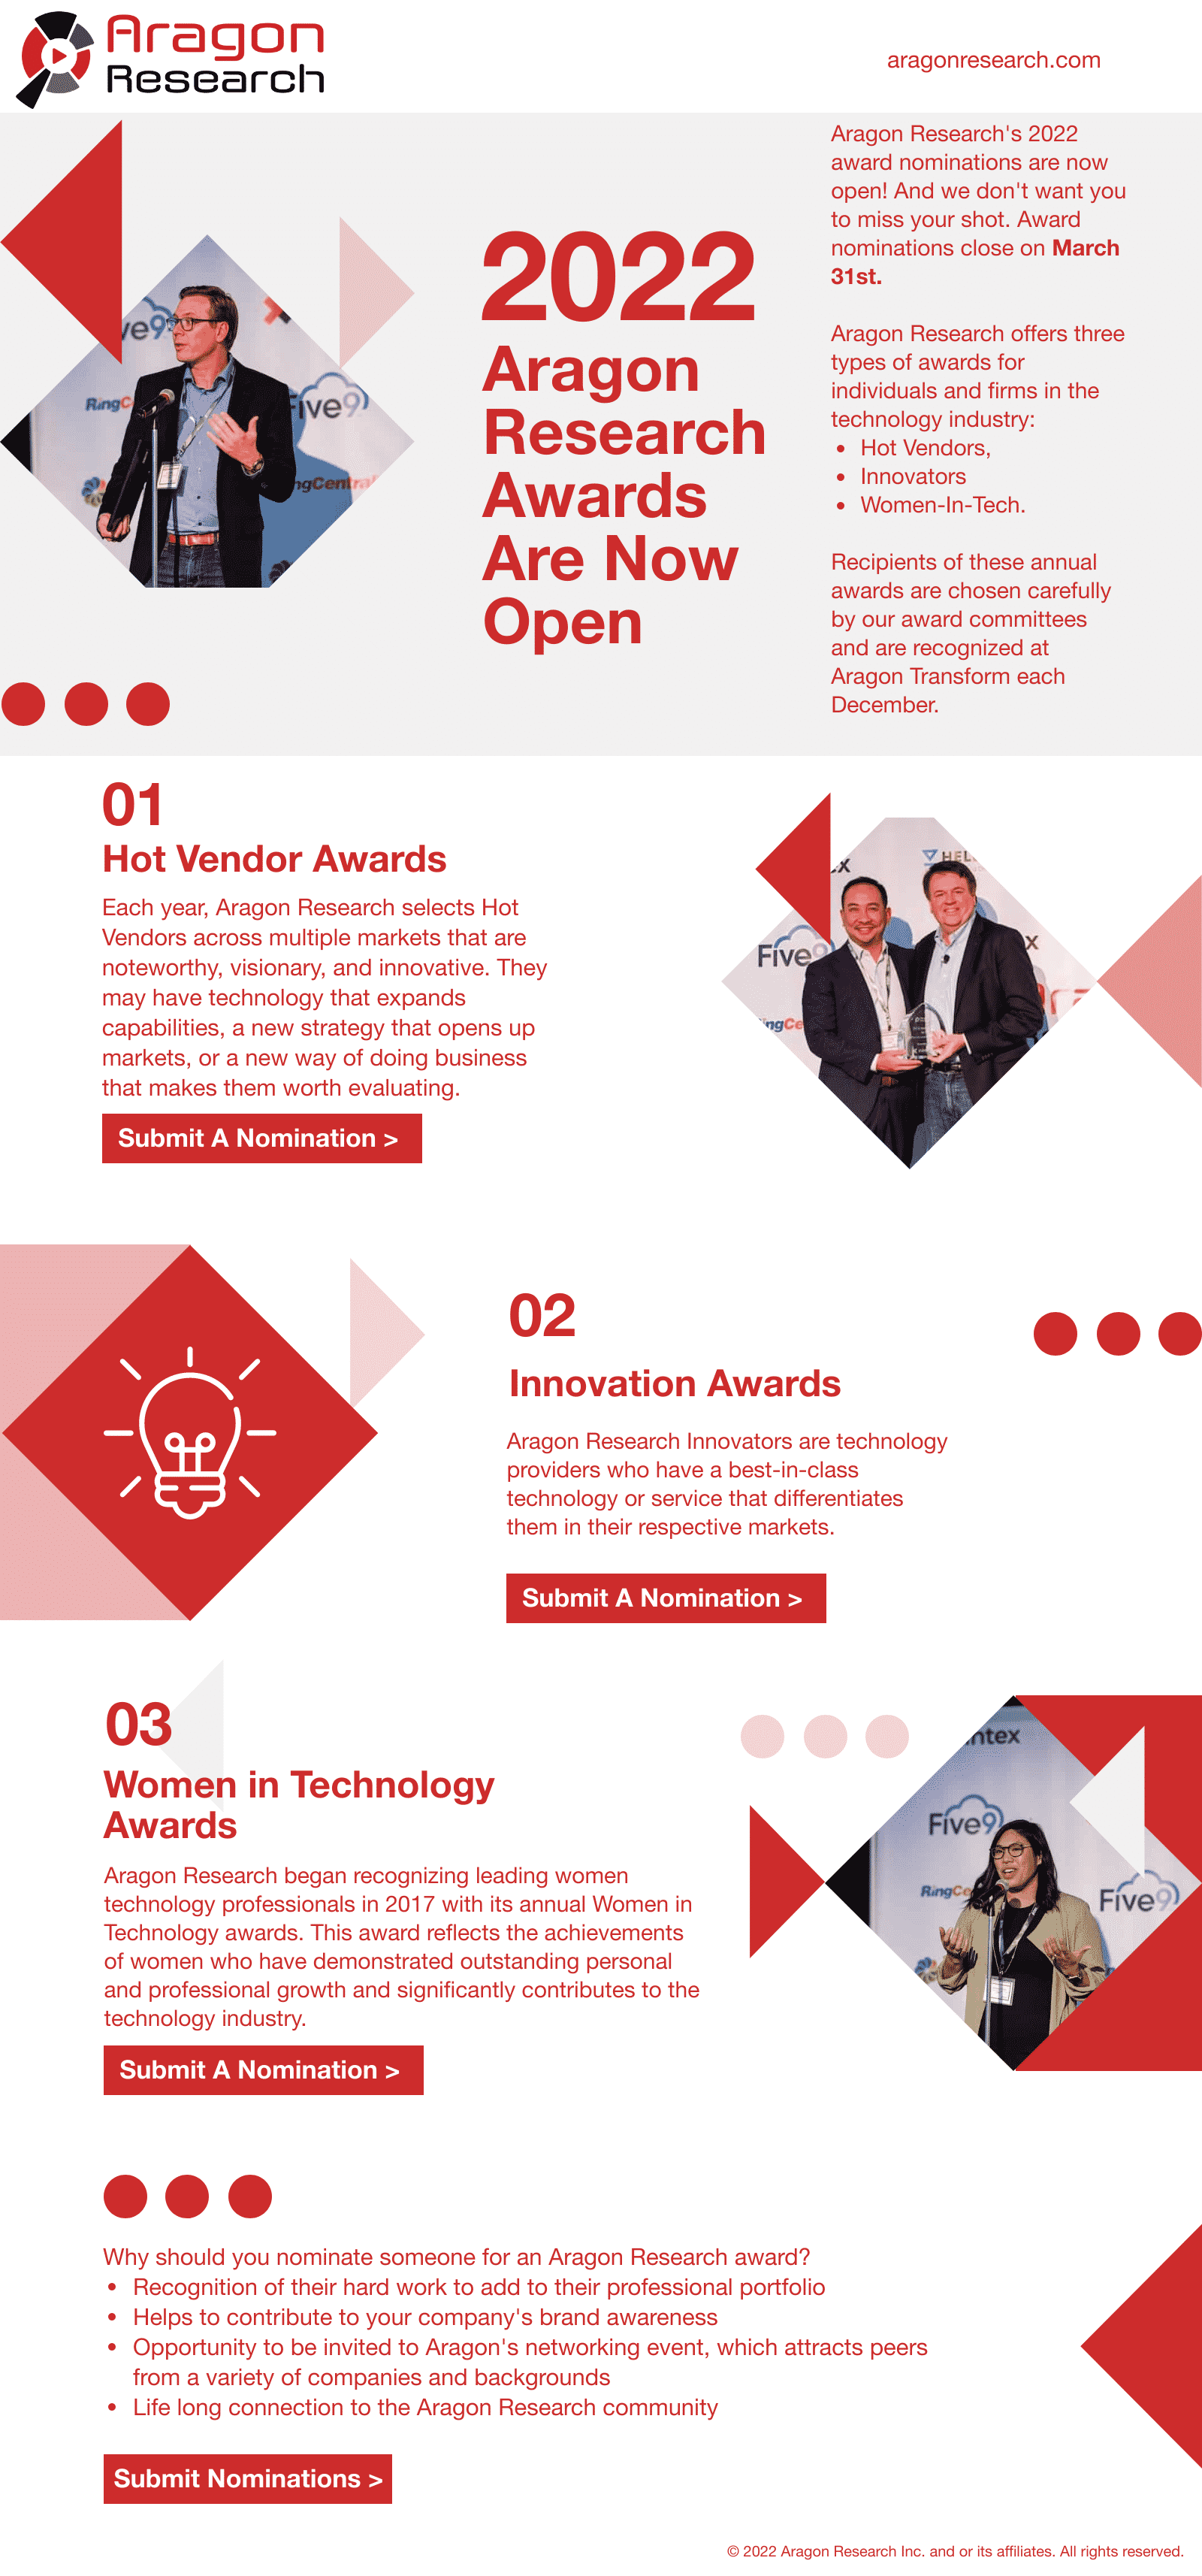 2022 awards 57377396 - [Infographic] 2022 Aragon Research Awards Nominations Are Now Open!